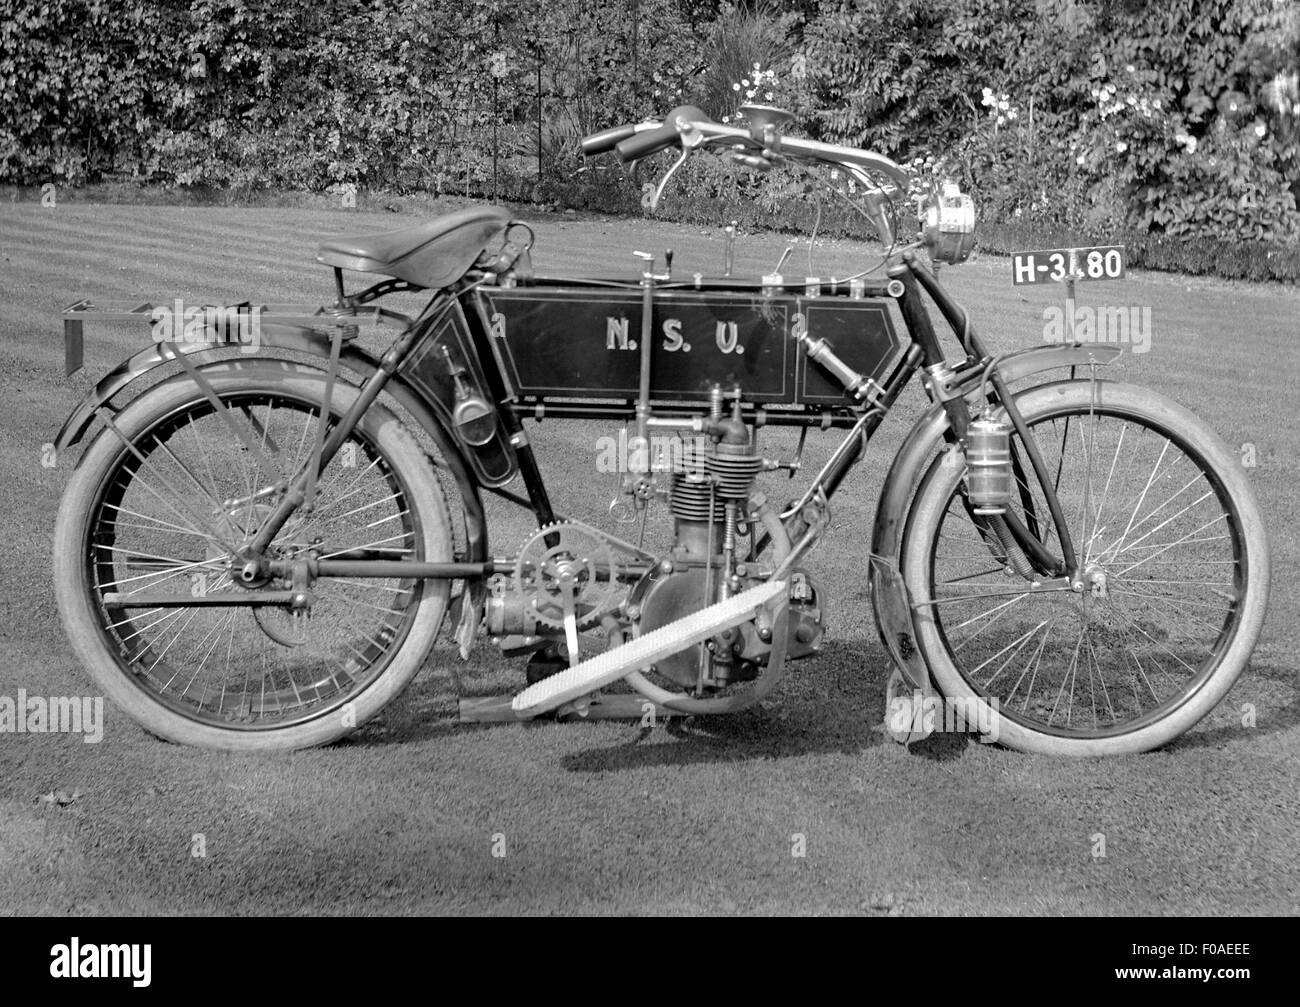 AJAXNETPHOTO - 1908 1914; 1911 (APPROX) - EDWARDIAN MOTORCYCLE - THE N.S.U. PHOTO:AJAX VINTAGE PICTURE LIBRARY REF:JB 80201 43 Stock Photo